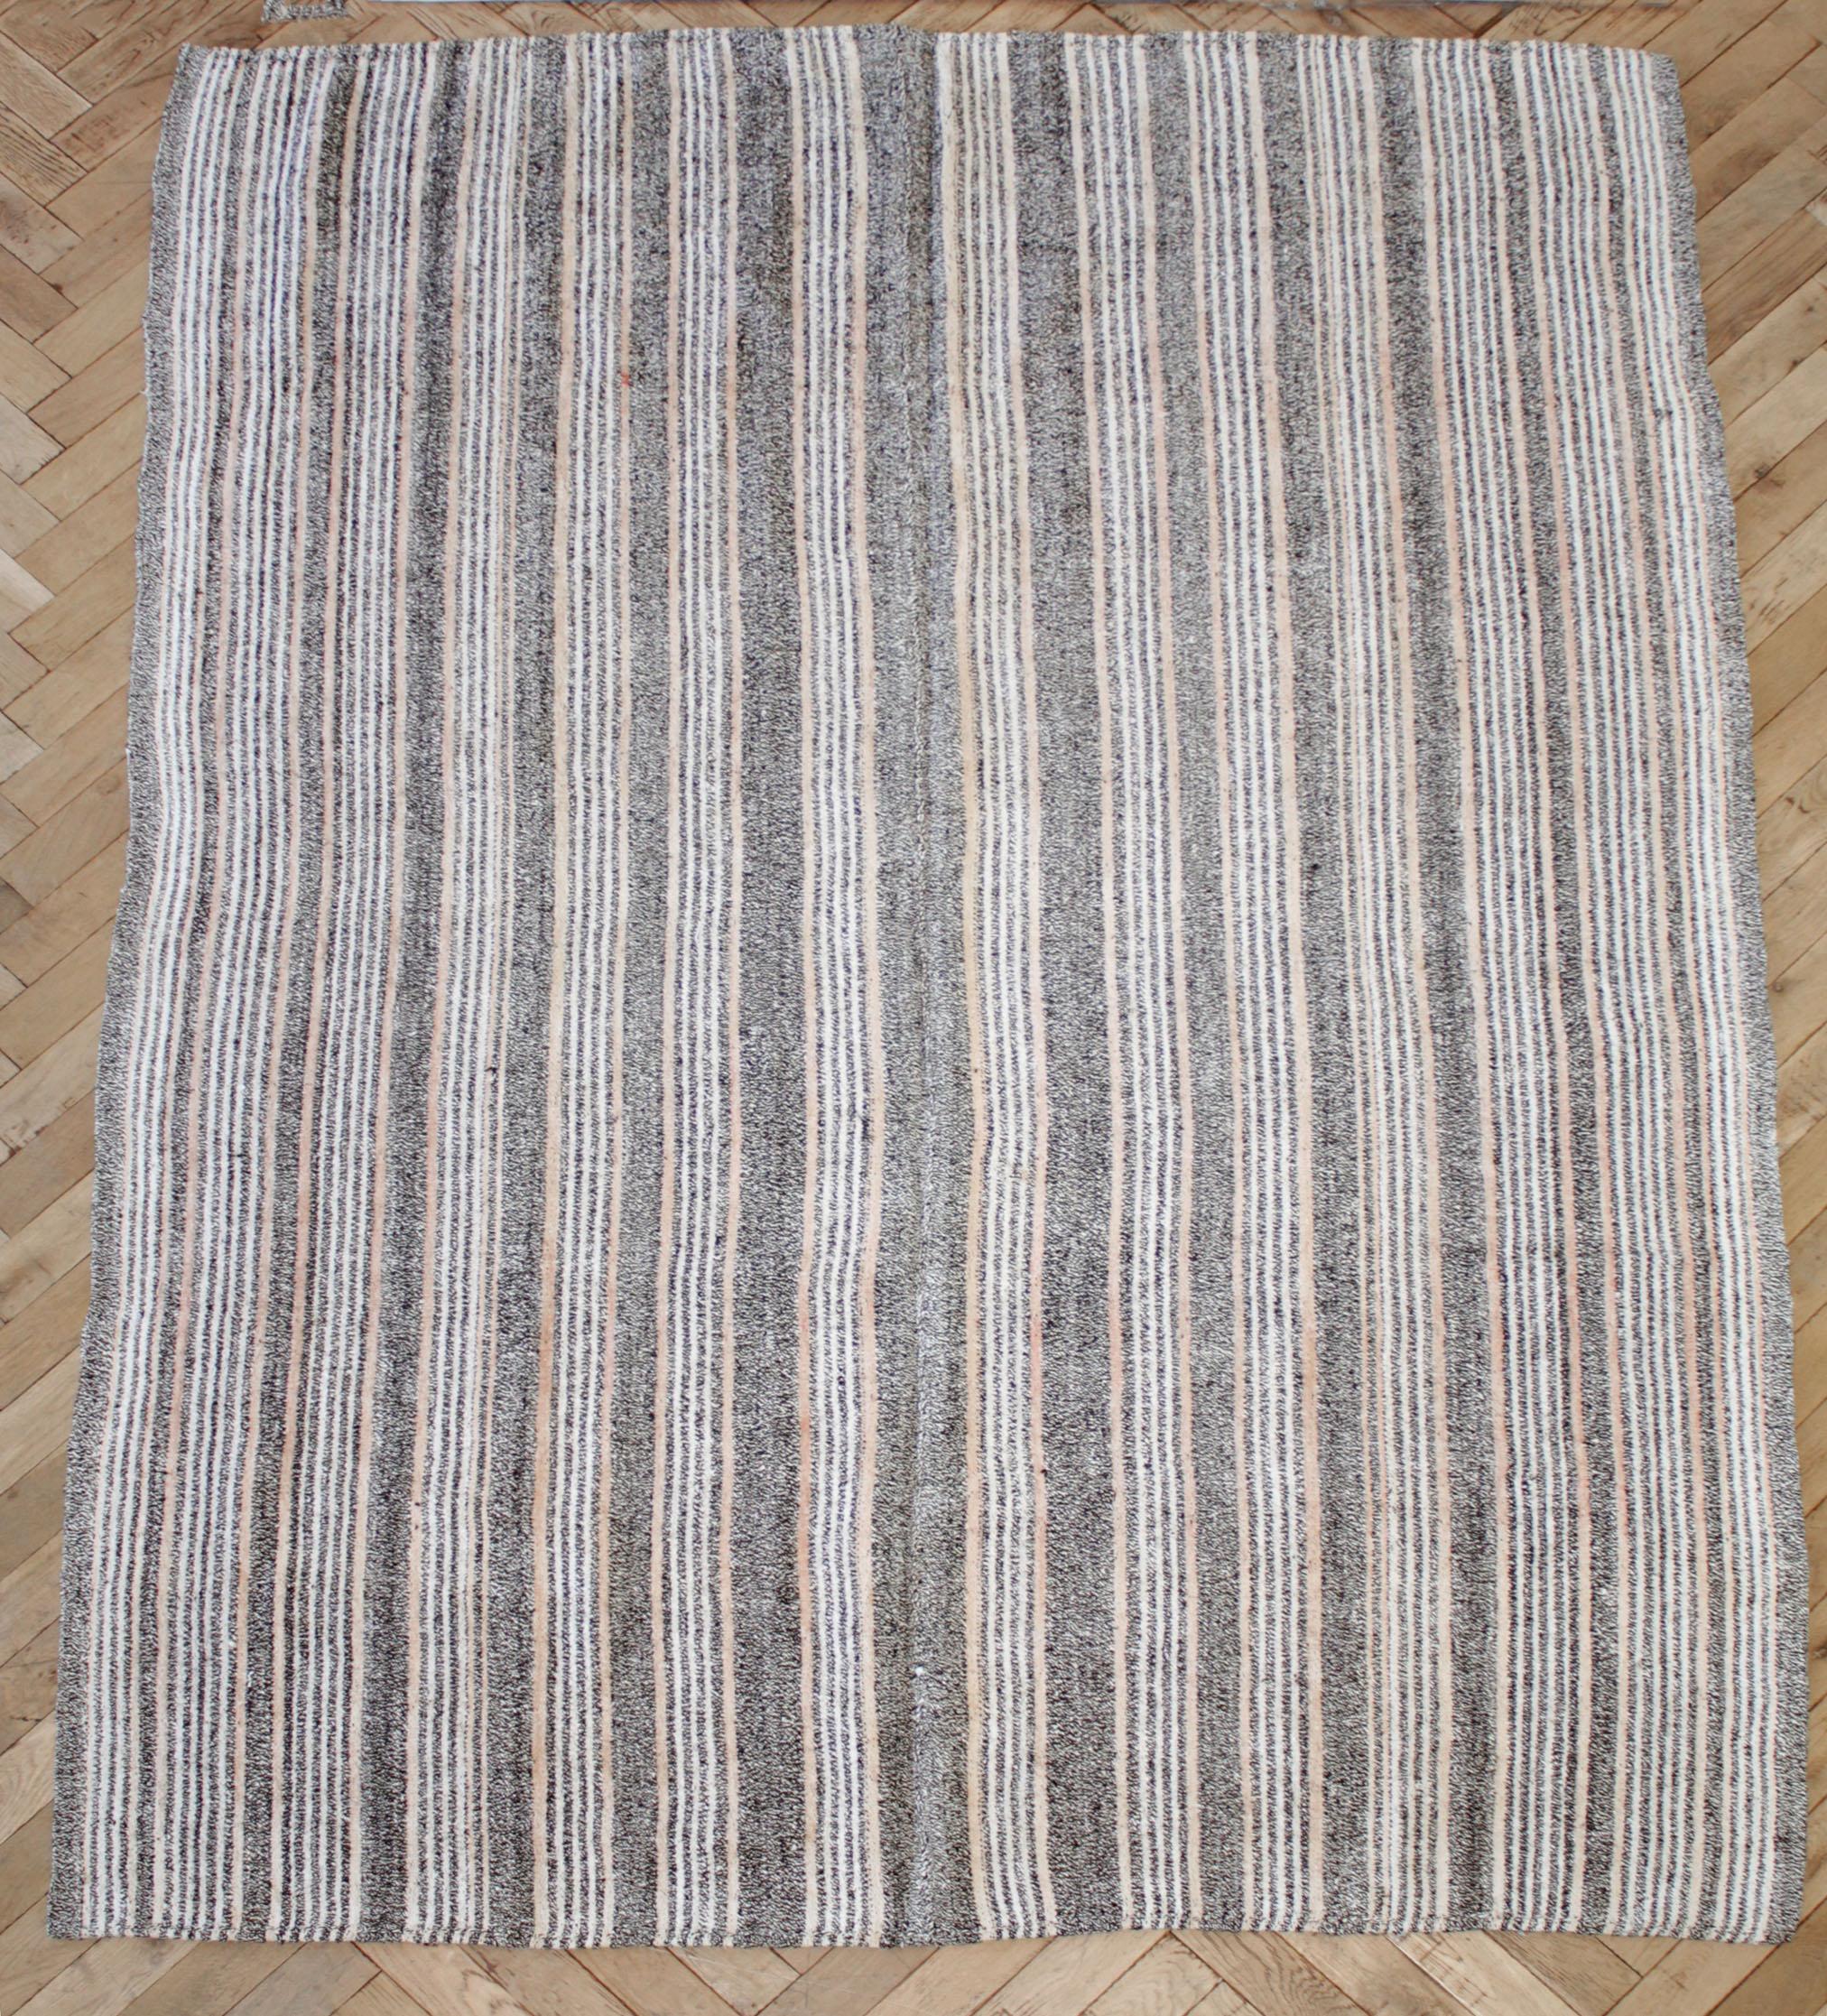 20th Century Vintage Turkish Flat-Weave Ramy Rug with Stripes